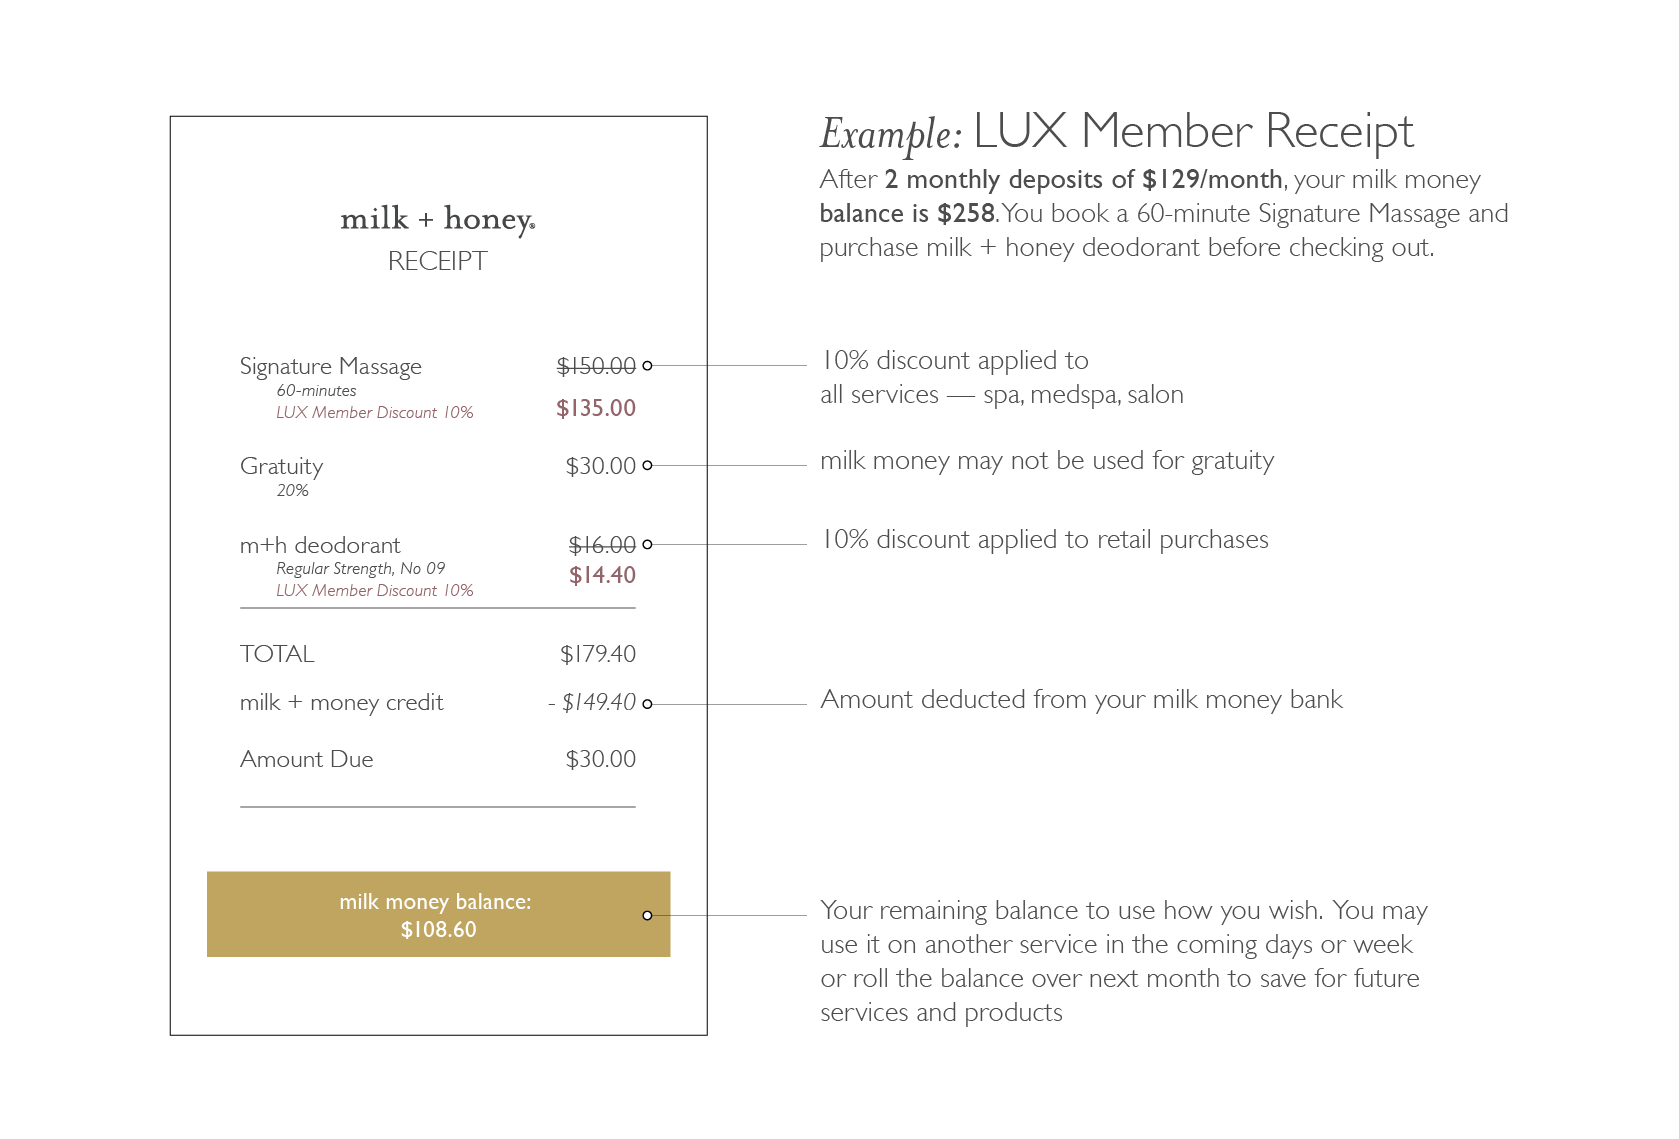 An image that illustrates an example receipt of a Lux Member. This image is for demonstration purposes only and does not show an actual milk + honey spa receipt